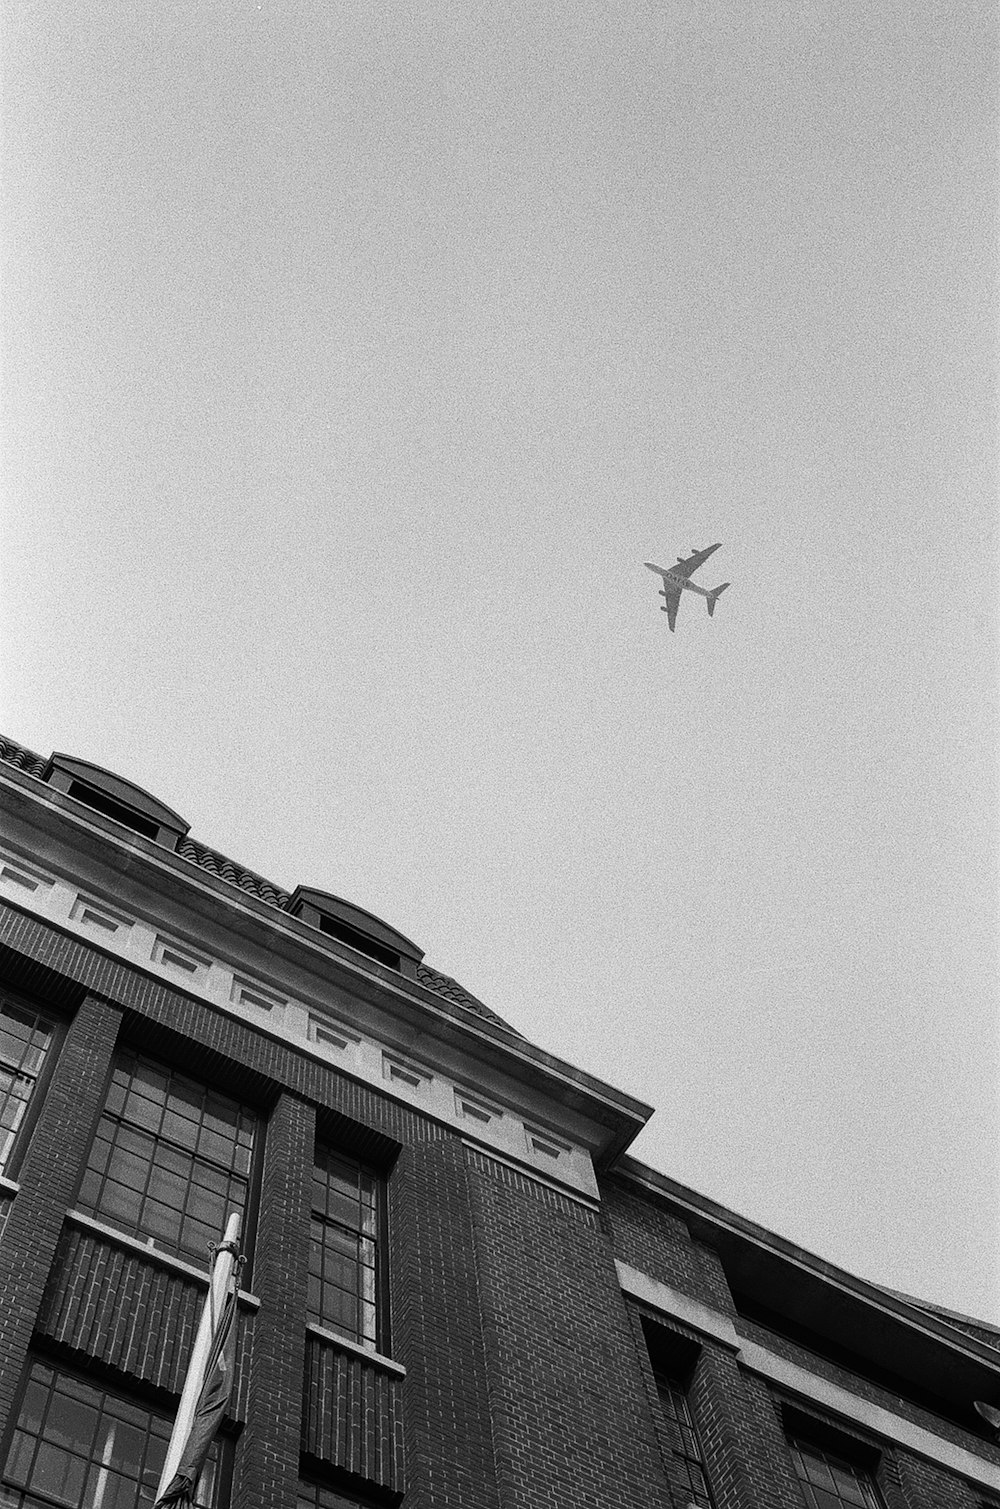 a black and white photo of an airplane flying over a building